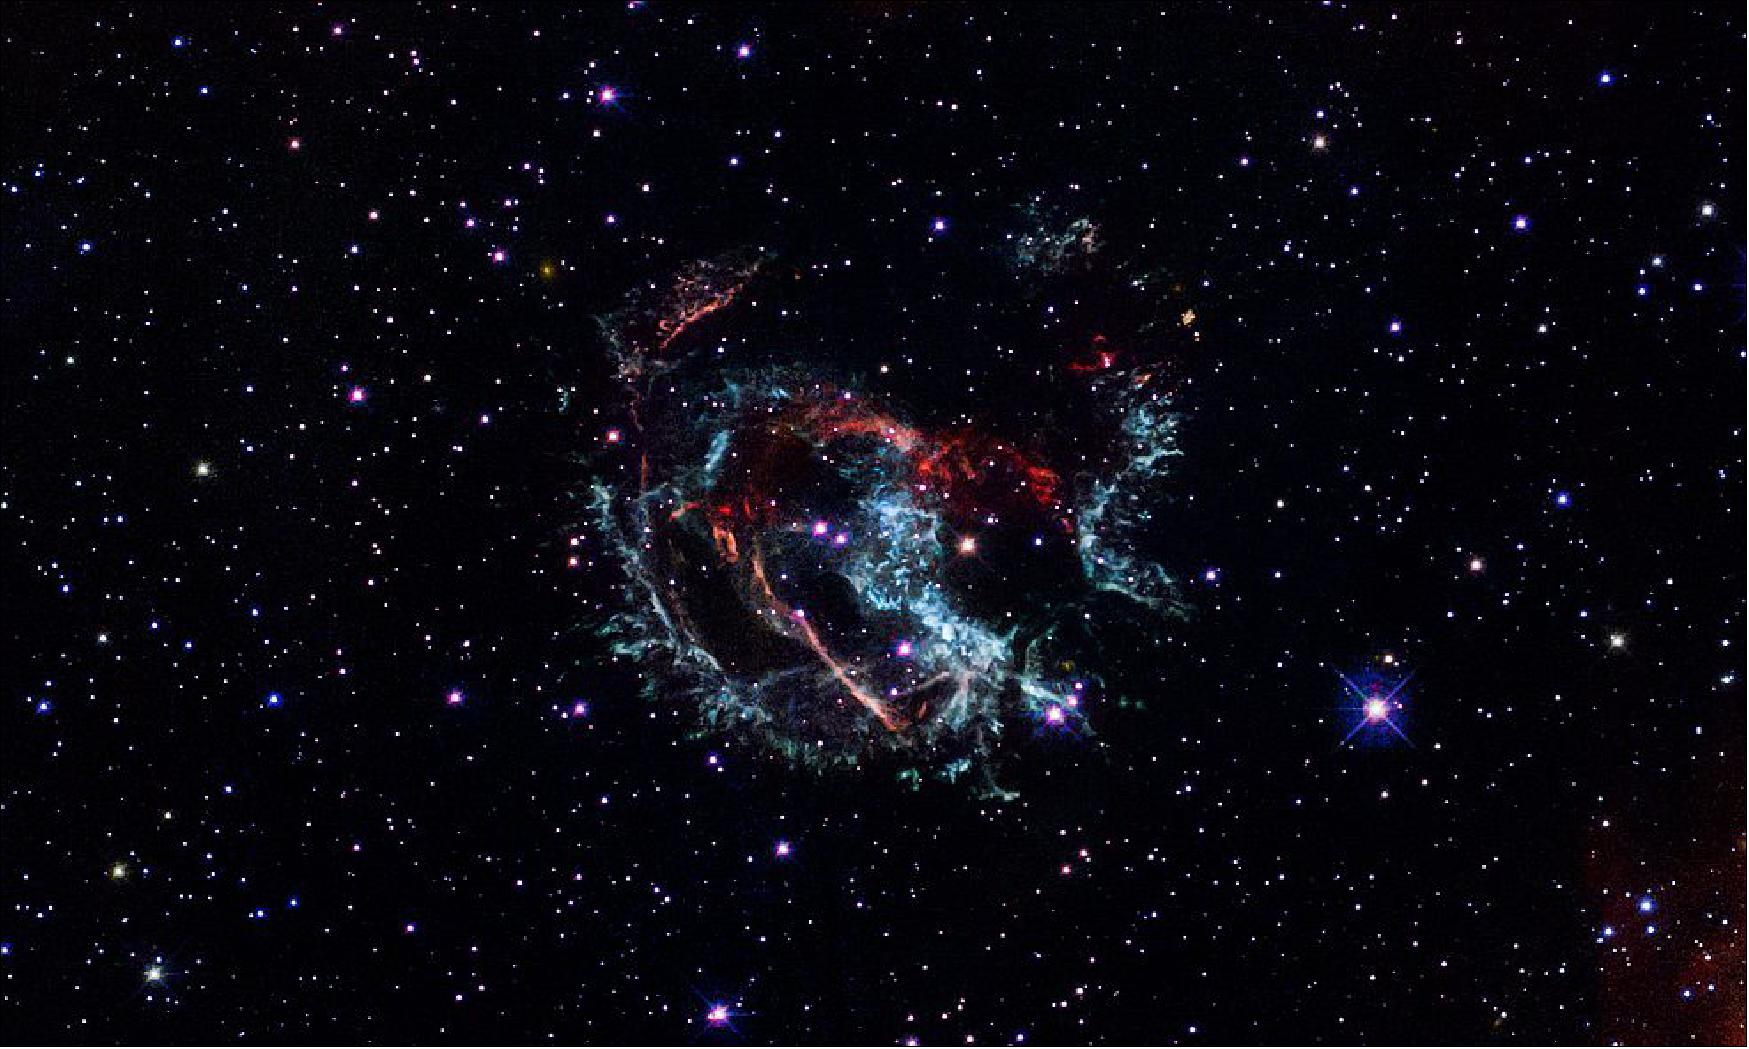 Figure 124: Hubble Captures the Supernova Remnant 1E 0102.2-7219. This Hubble Space Telescope portrait reveals the gaseous remains of an exploded massive star that erupted approximately 1,700 years ago. The stellar corpse, a supernova remnant named 1E 0102.2-7219, met its demise in the Small Magellanic Cloud, a satellite galaxy of our Milky Way [image credits: NASA, ESA, and J. Banovetz and D. Milisavljevic (Purdue University)]